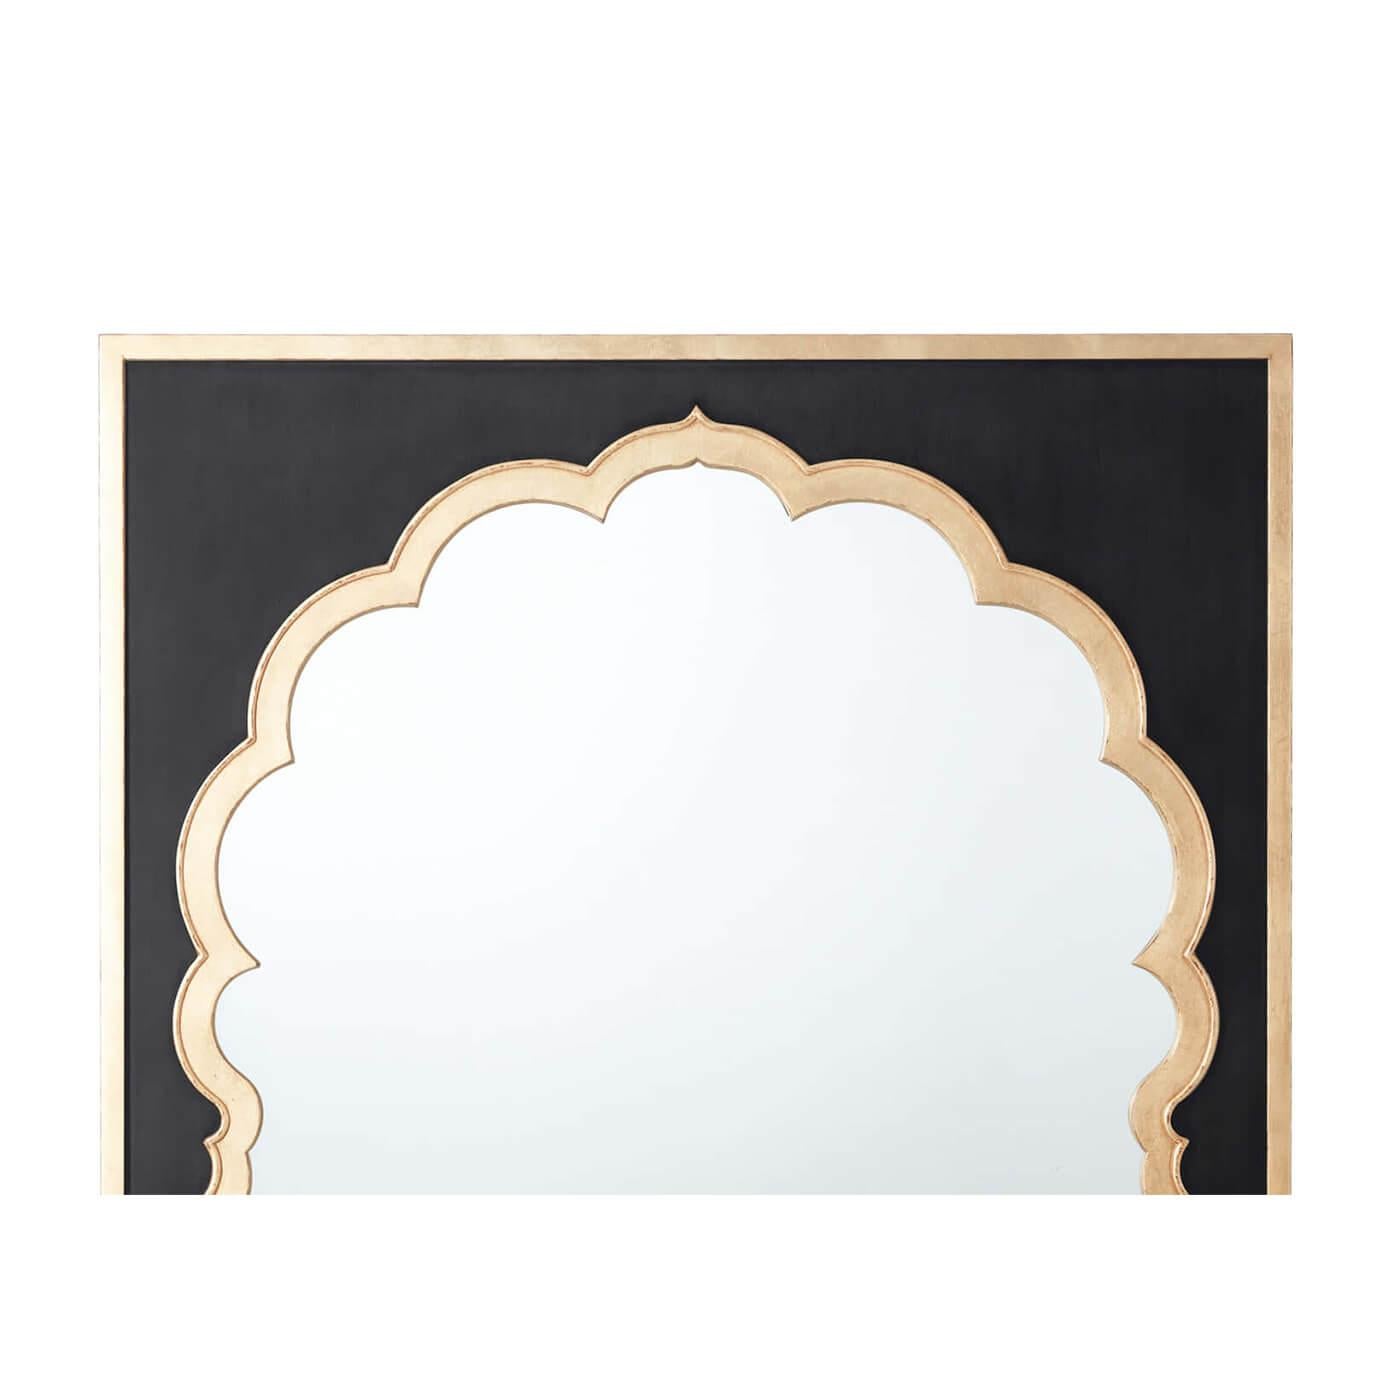 A Moroccan decorative mirror can add instant architecture to a room. The mirror evokes Moorish architecture with an exotic sculpted arch surrounding the mirror plate.

Dimensions: 36